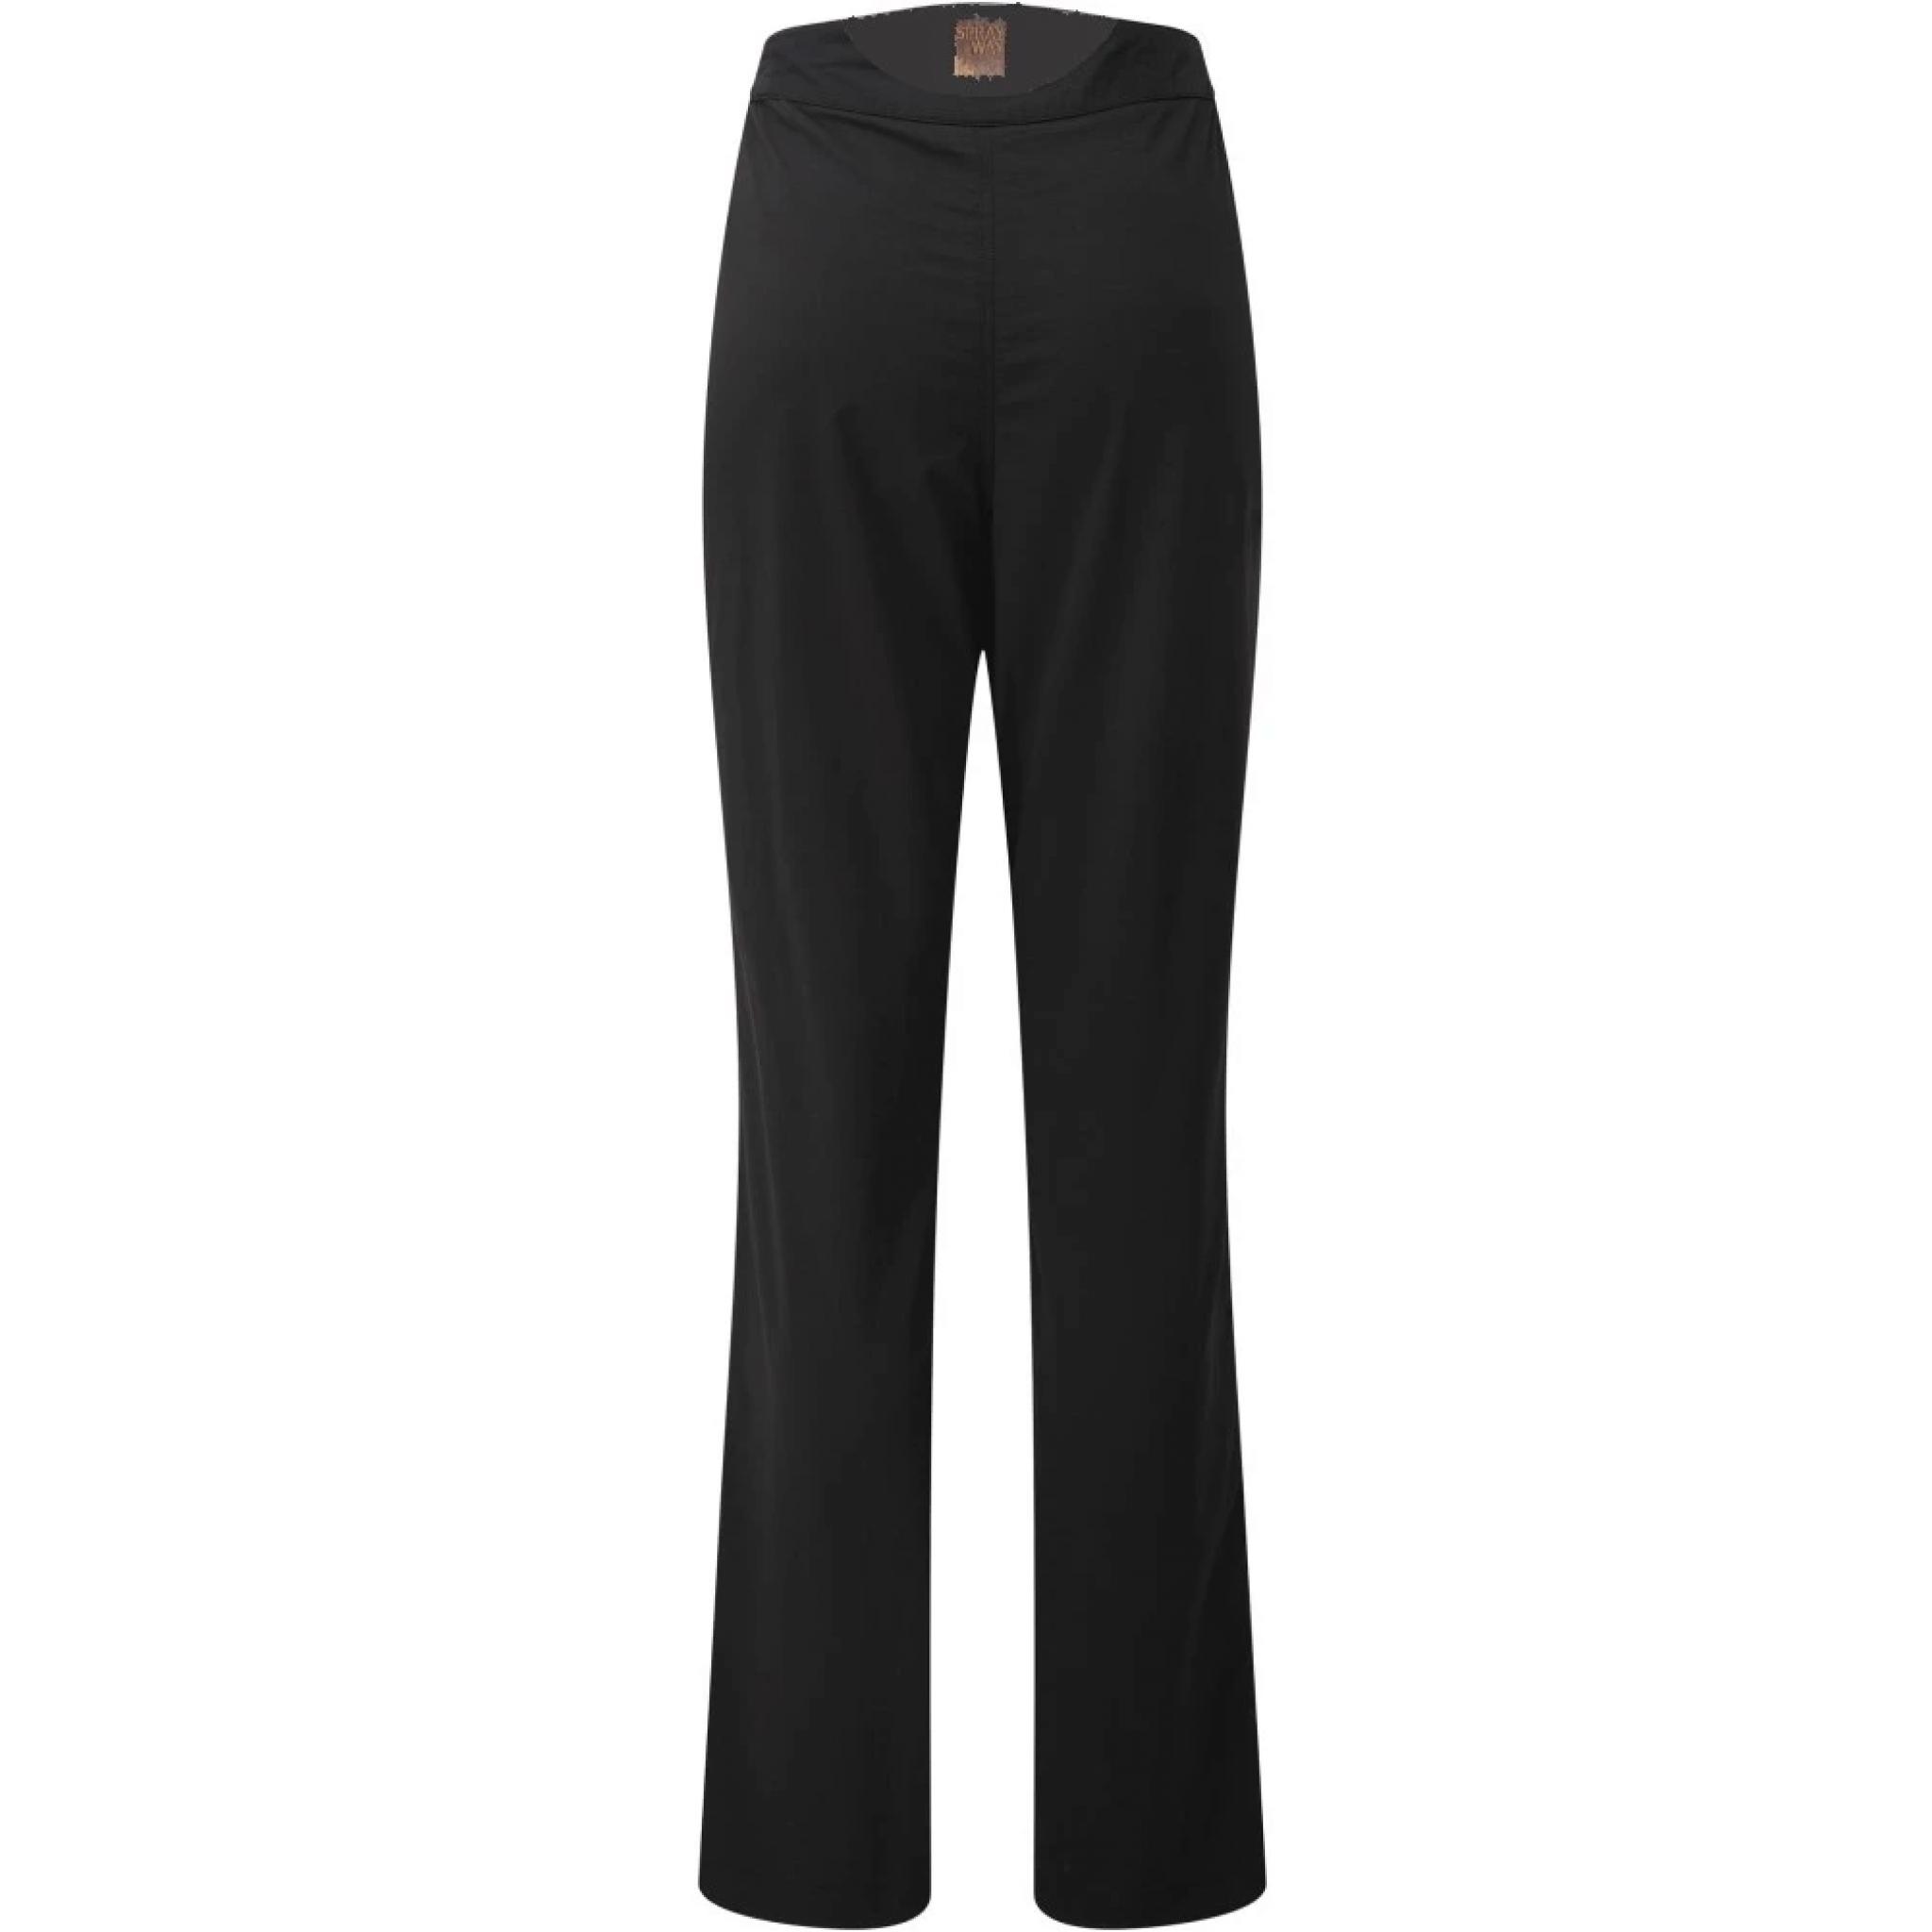 Sprayway Womens Escape Pants Quality Hiking Trousers | Agoora Outdoor